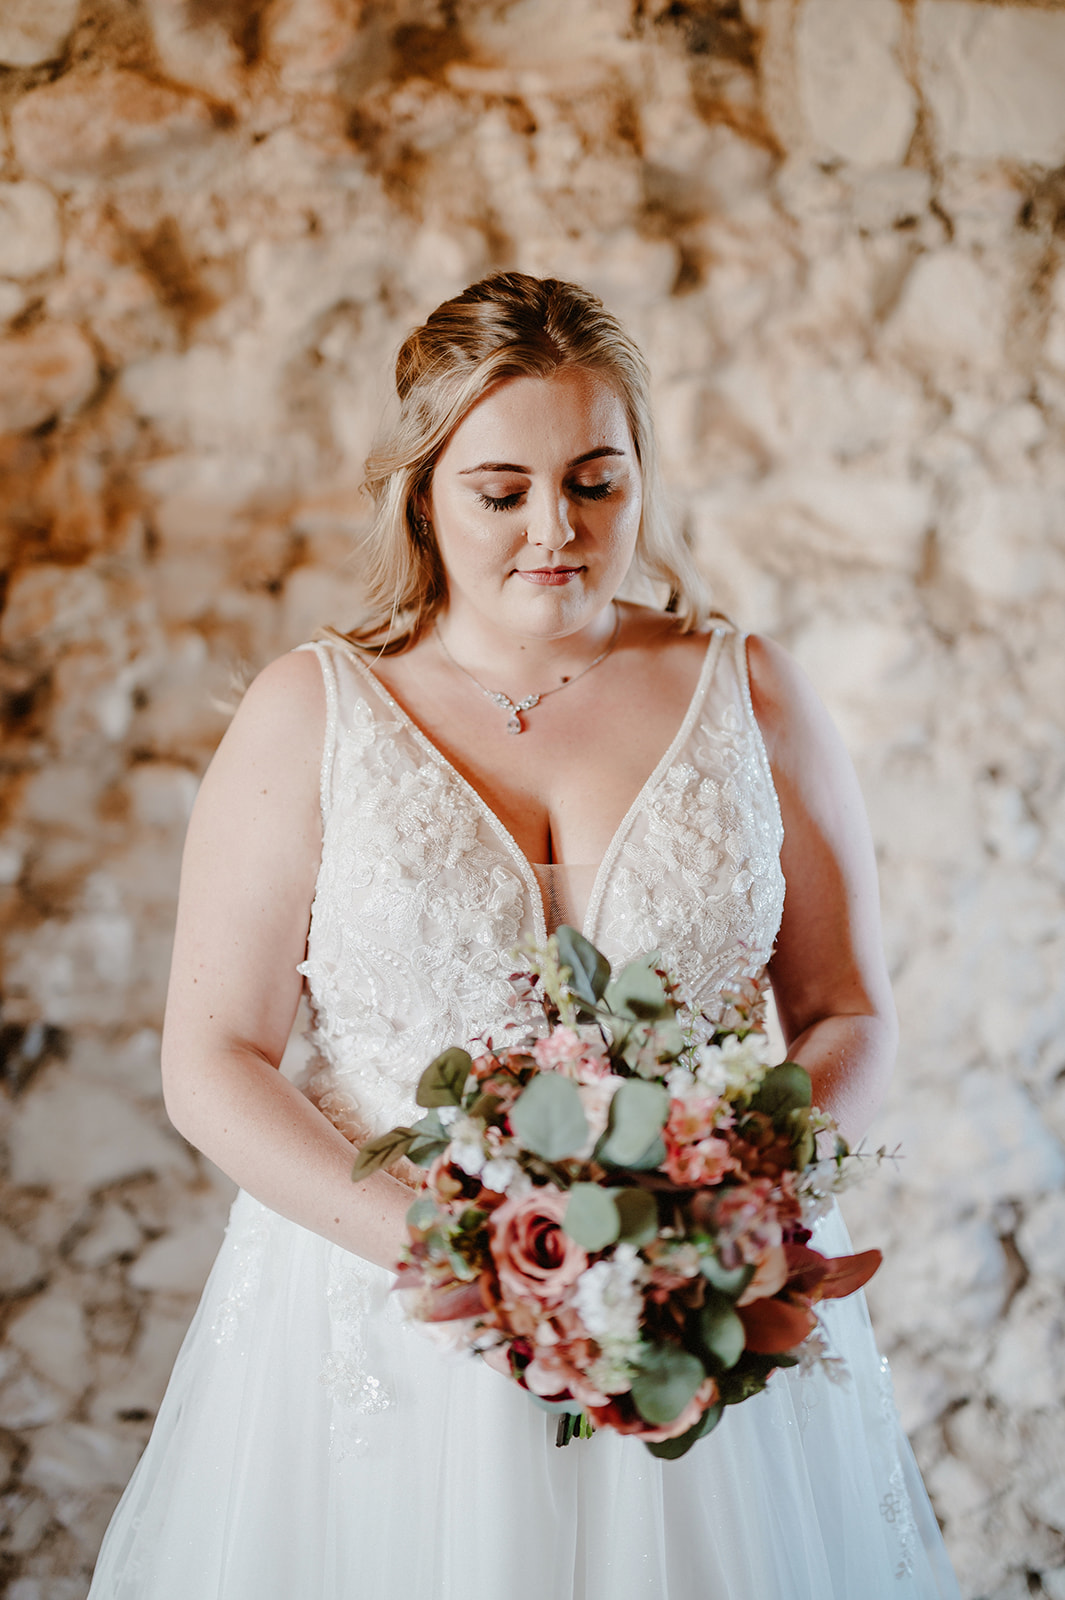 beautiful bride posing for wedding photography looking down at her flowers in front of a rustic brick wall at pentney abbey in natural light